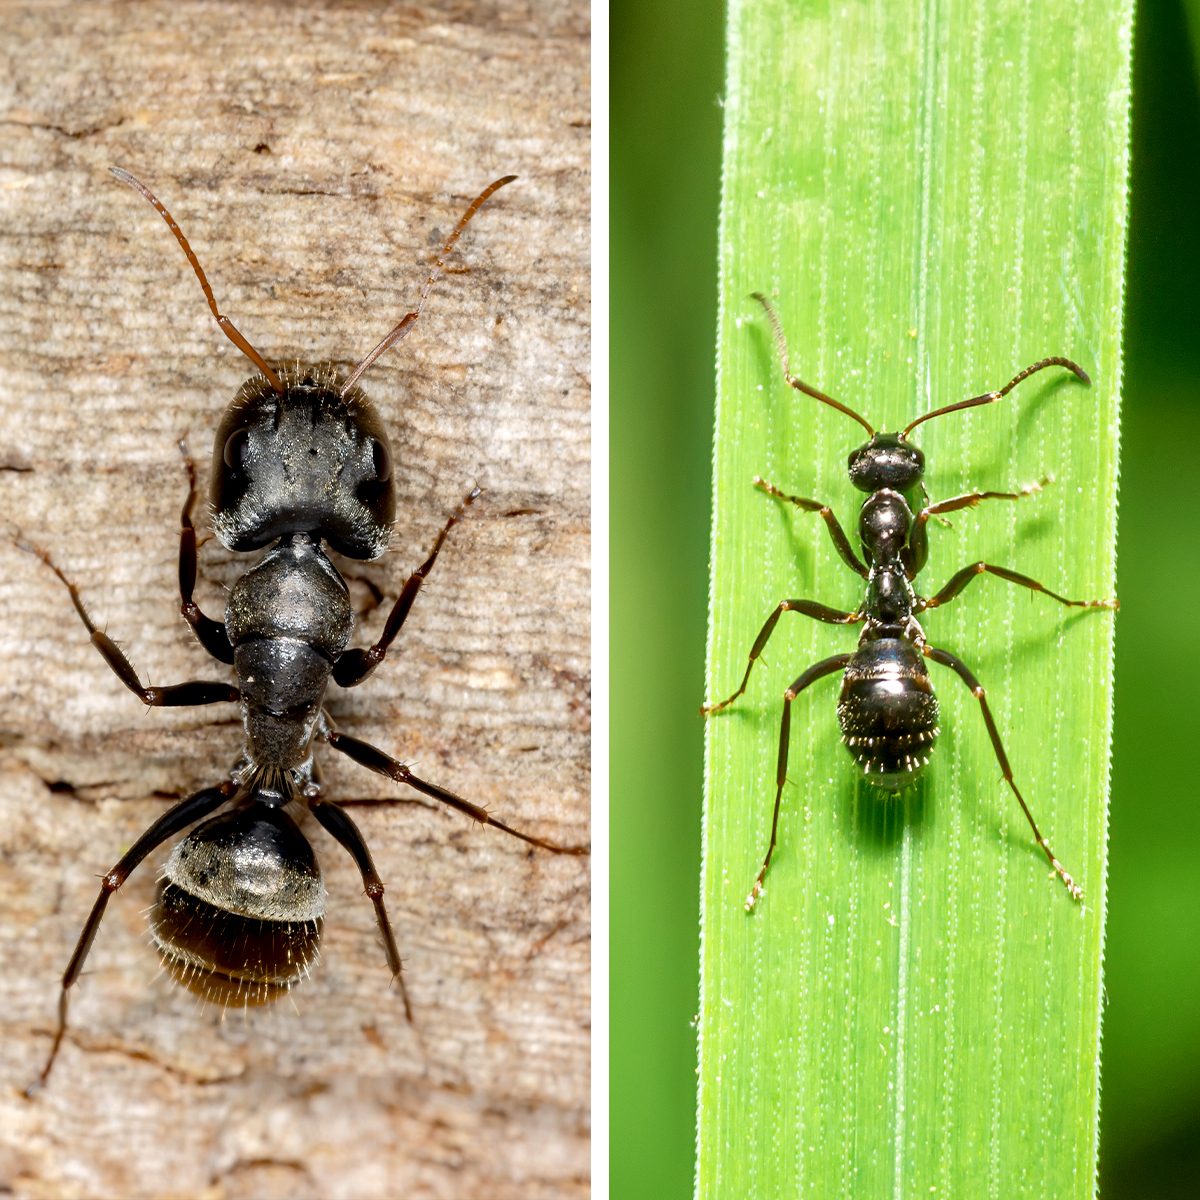 Carpenter Ants vs. Black Ants: What's the Difference?